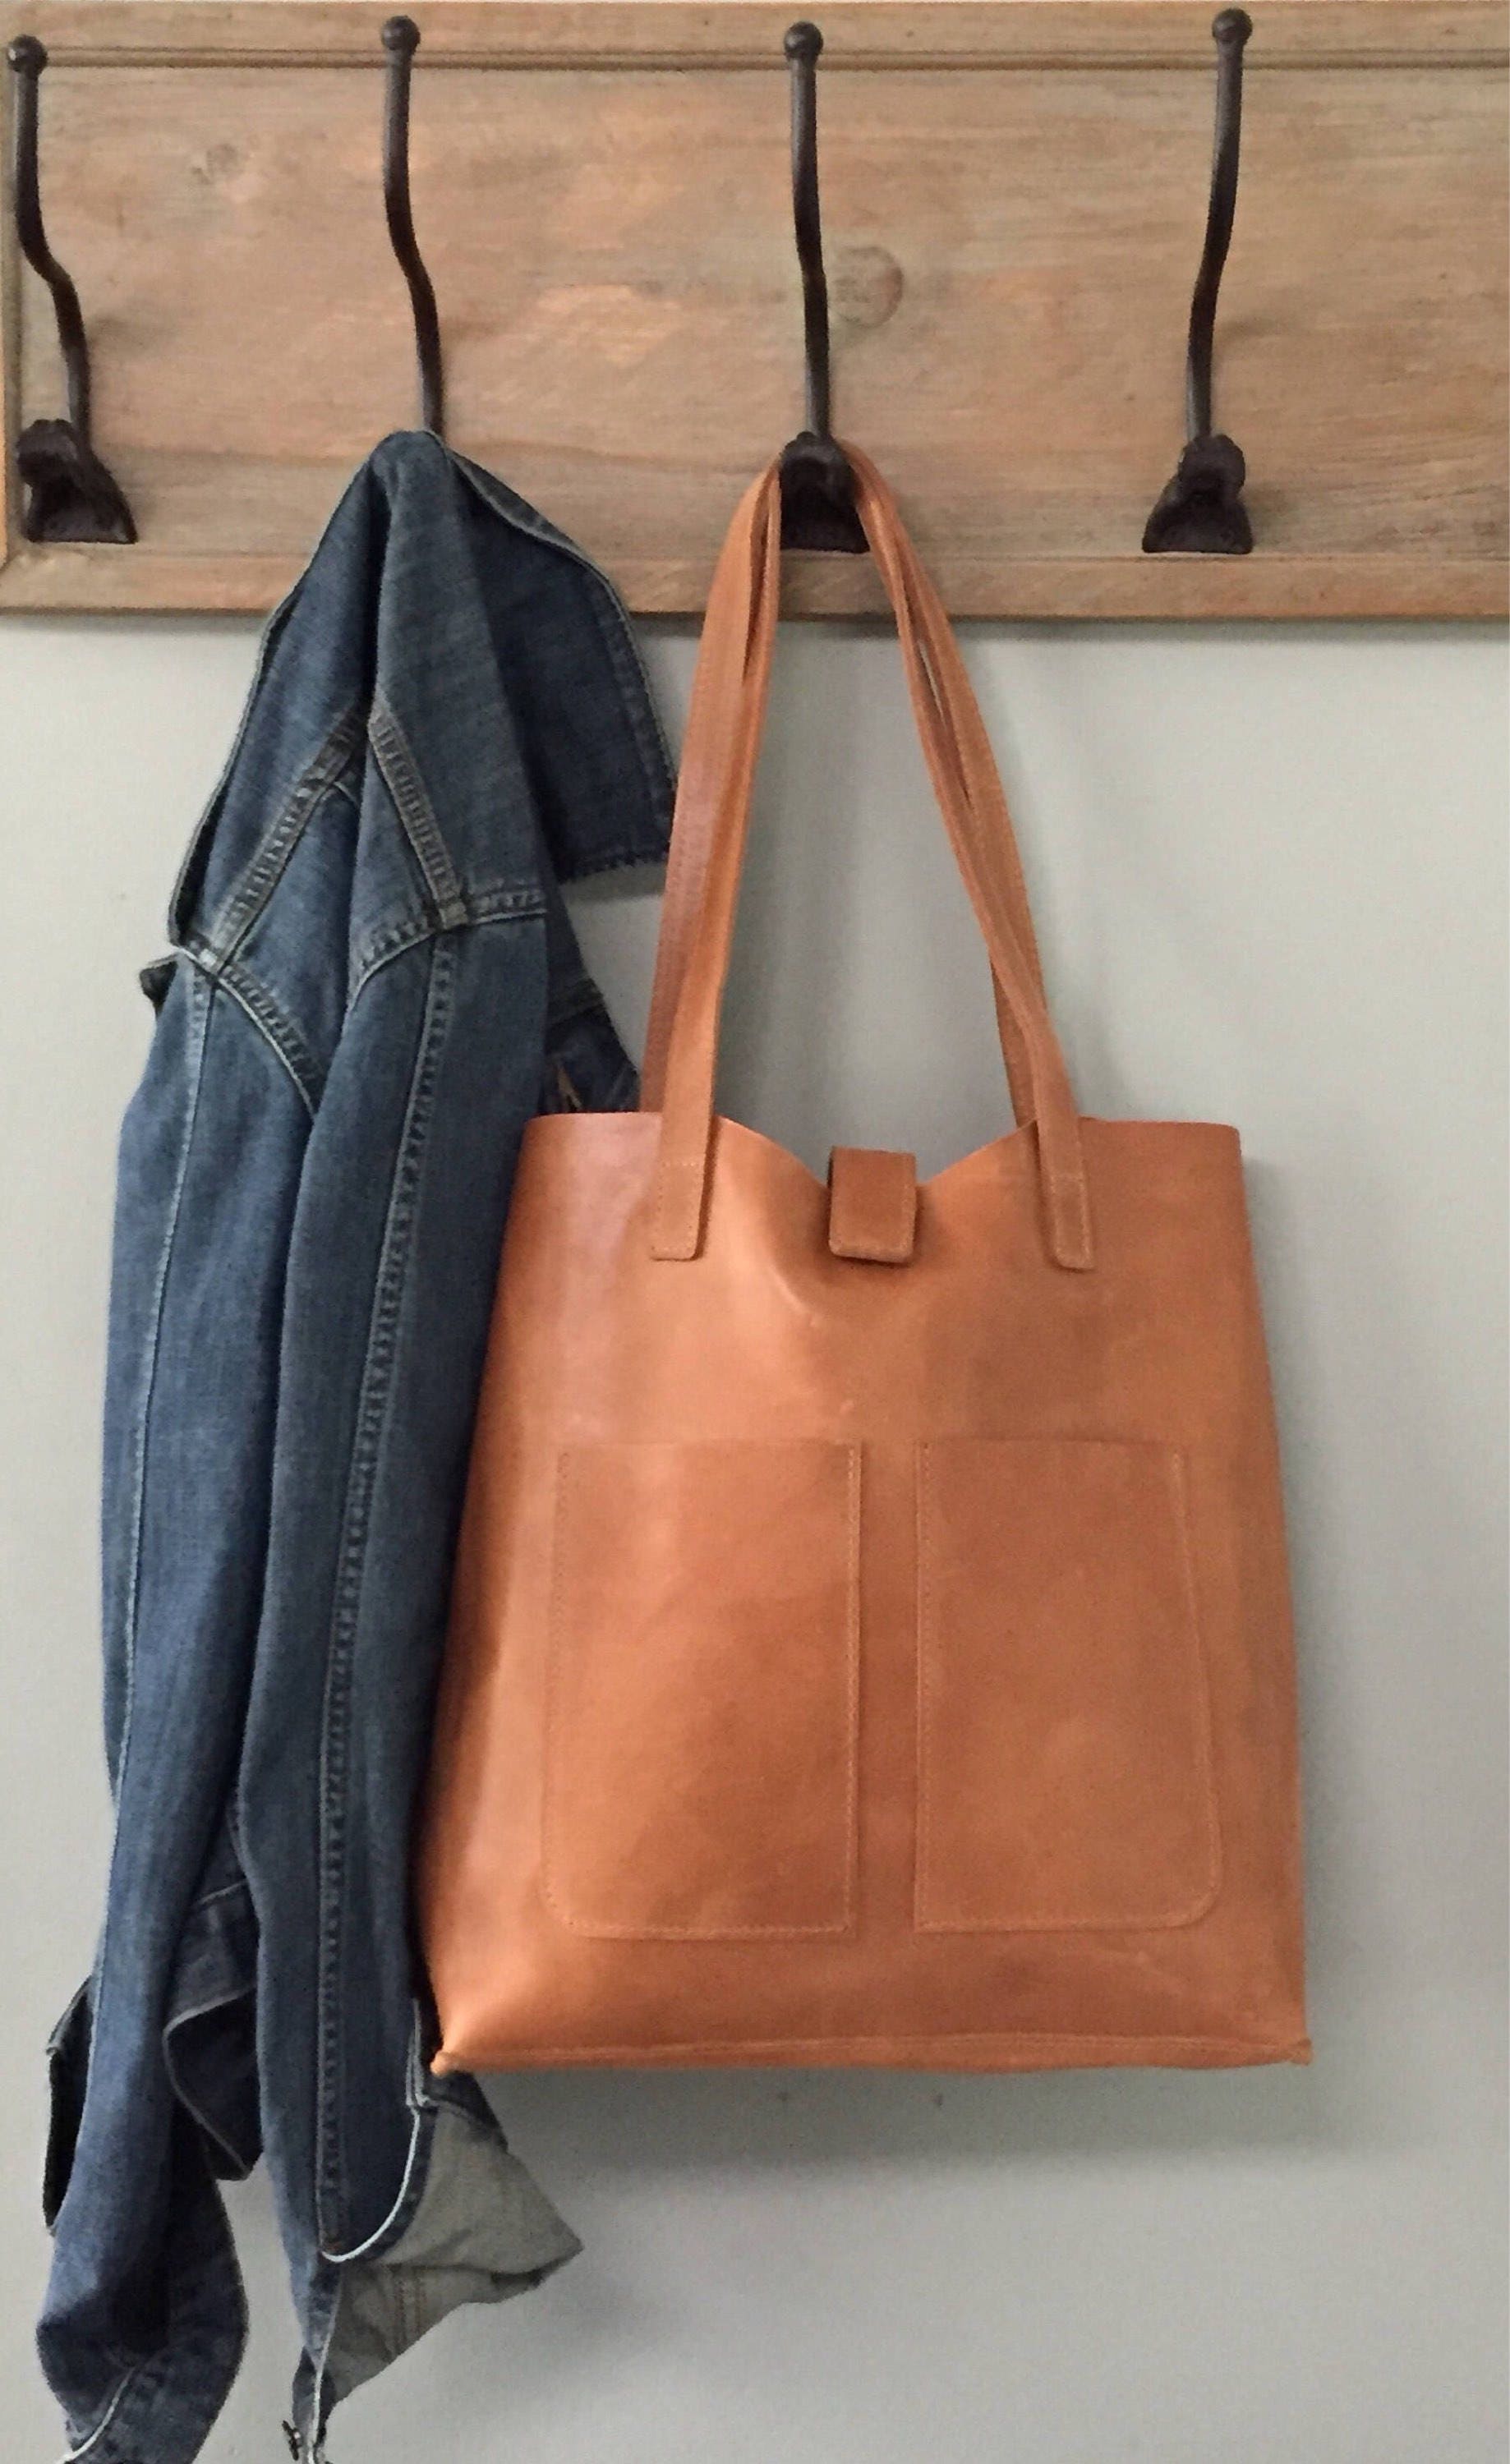 Distressed Leather Tote available in two colors